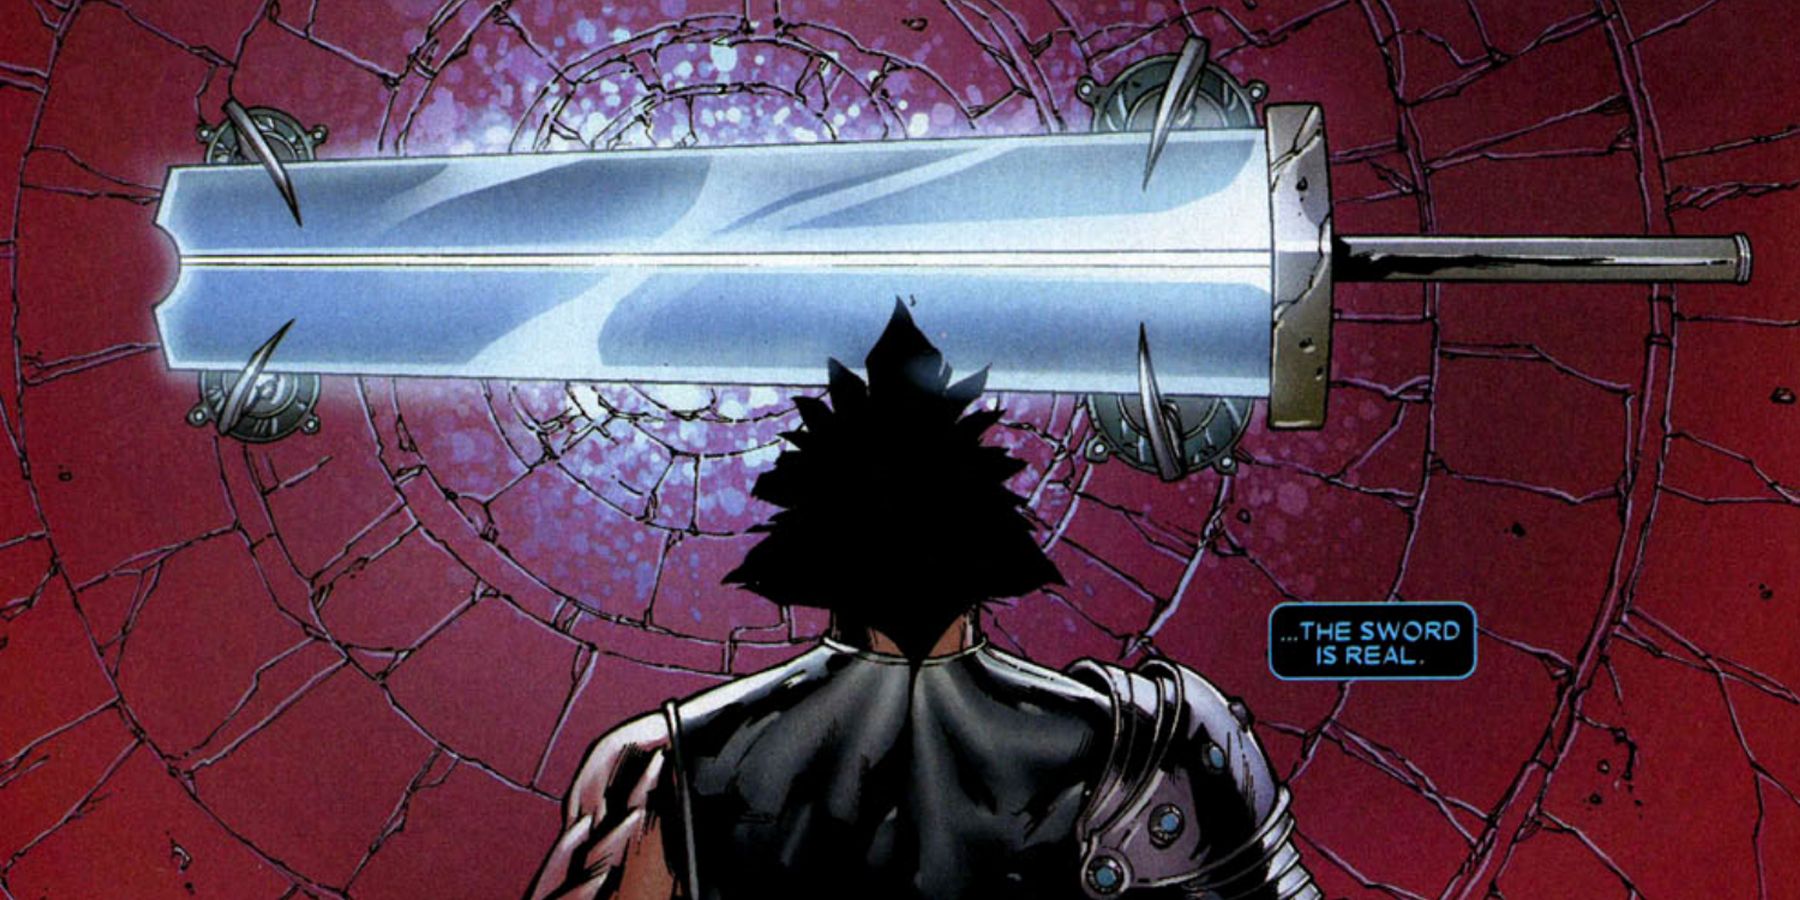 The Phoenix Blade mounted on the wall in Marvel Comcis